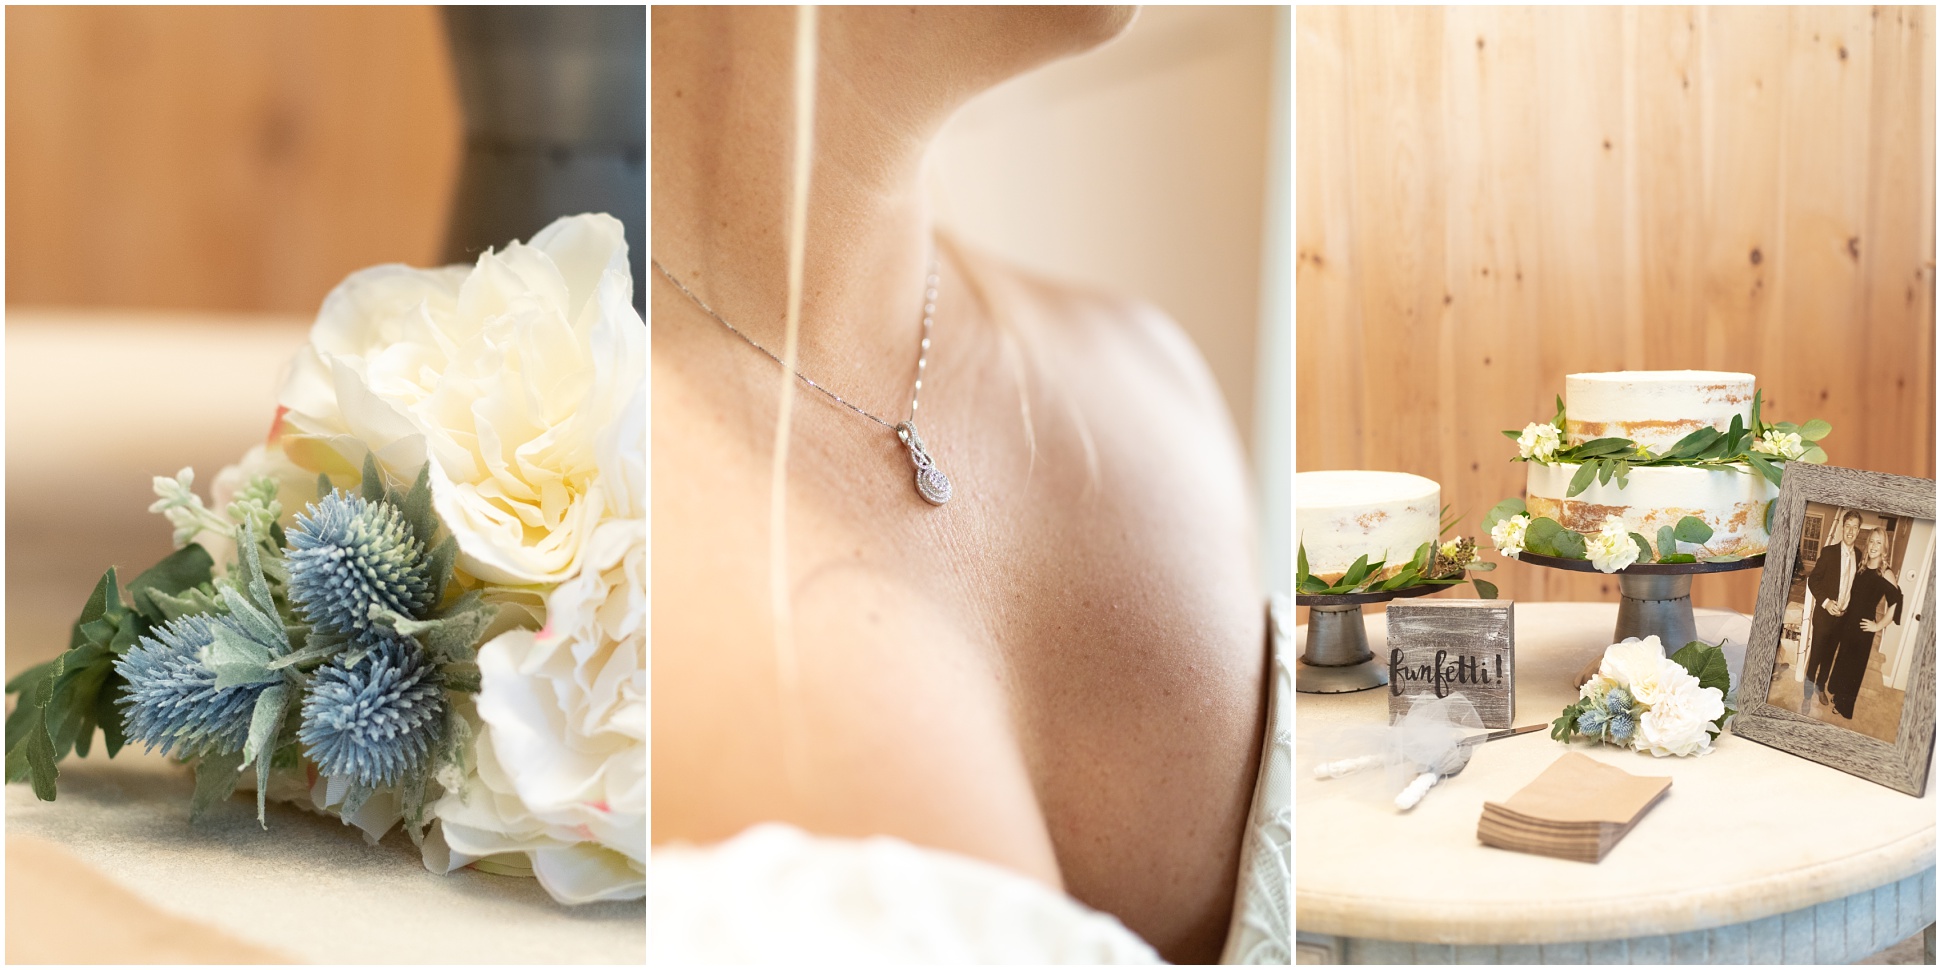 Flowers, The Cake, and A Close Up Photo of Bride's Necklace